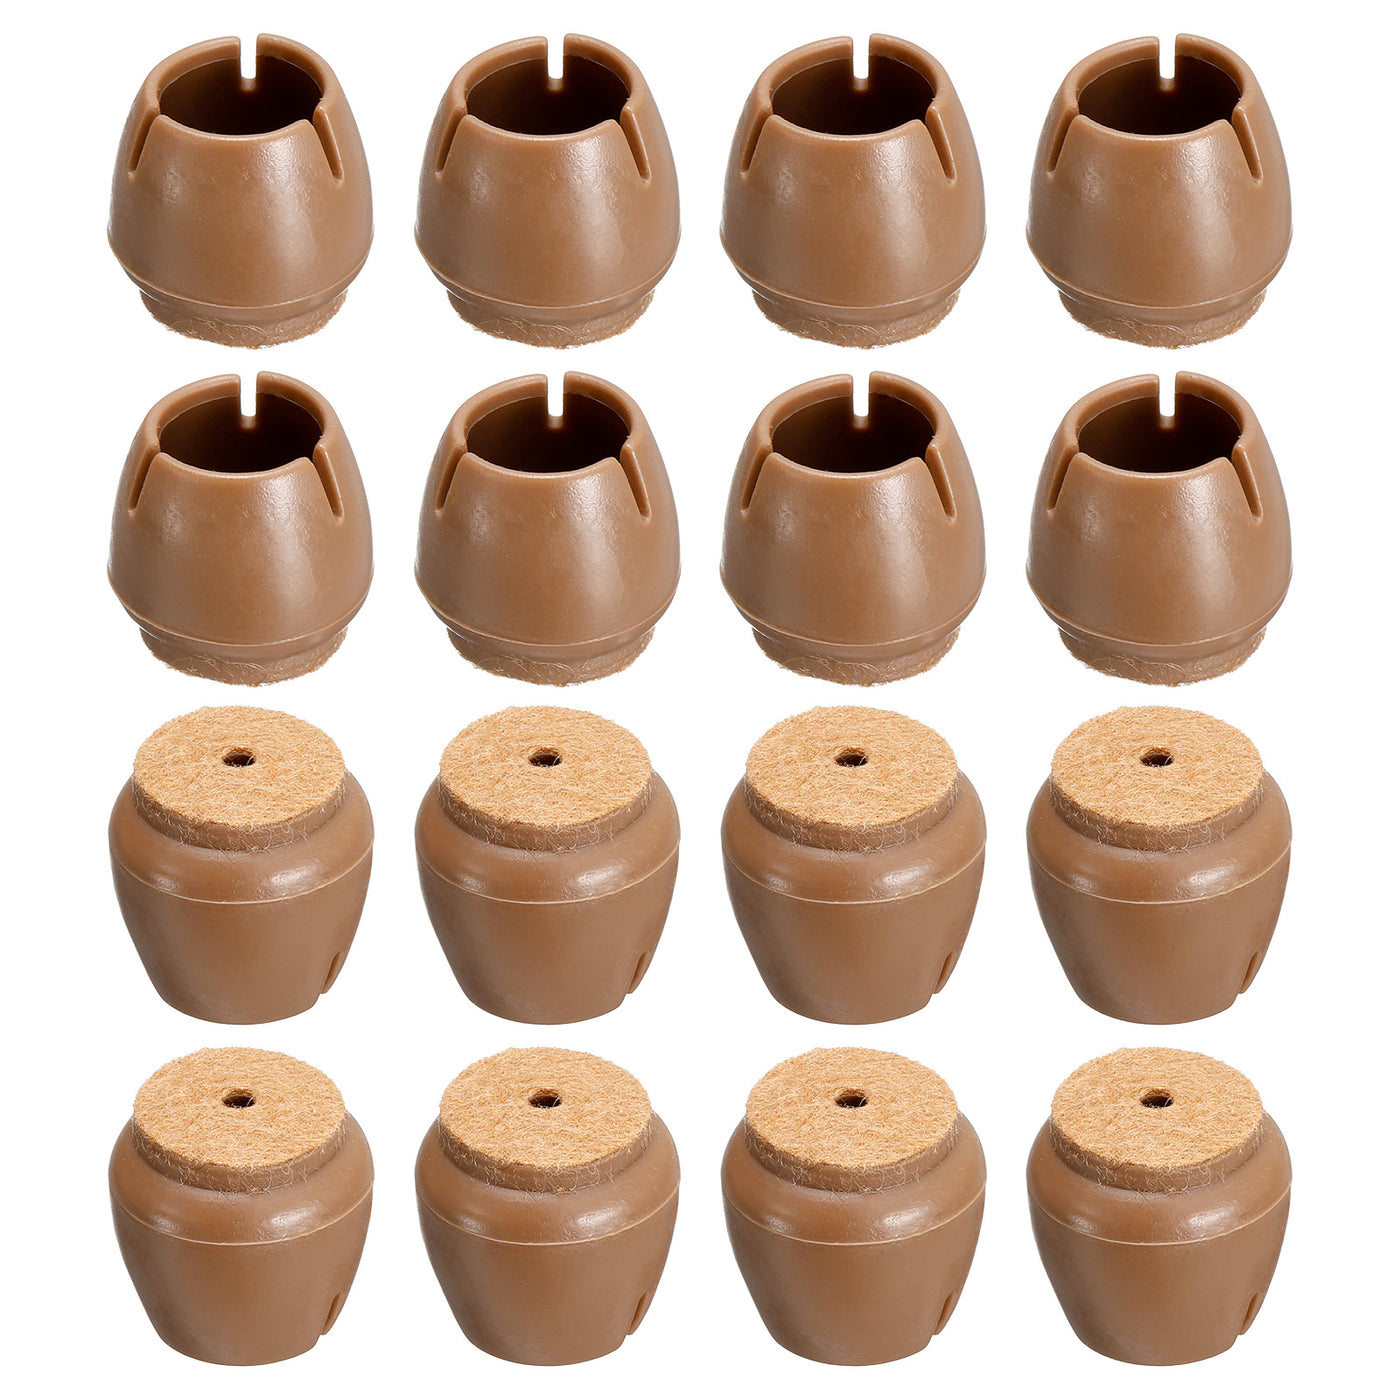 uxcell Uxcell Chair Leg Floor Protectors, 16Pcs 17mm(0.67") Silicone & Felt Chair Leg Cover Caps for Hardwood Floors (Coffee)